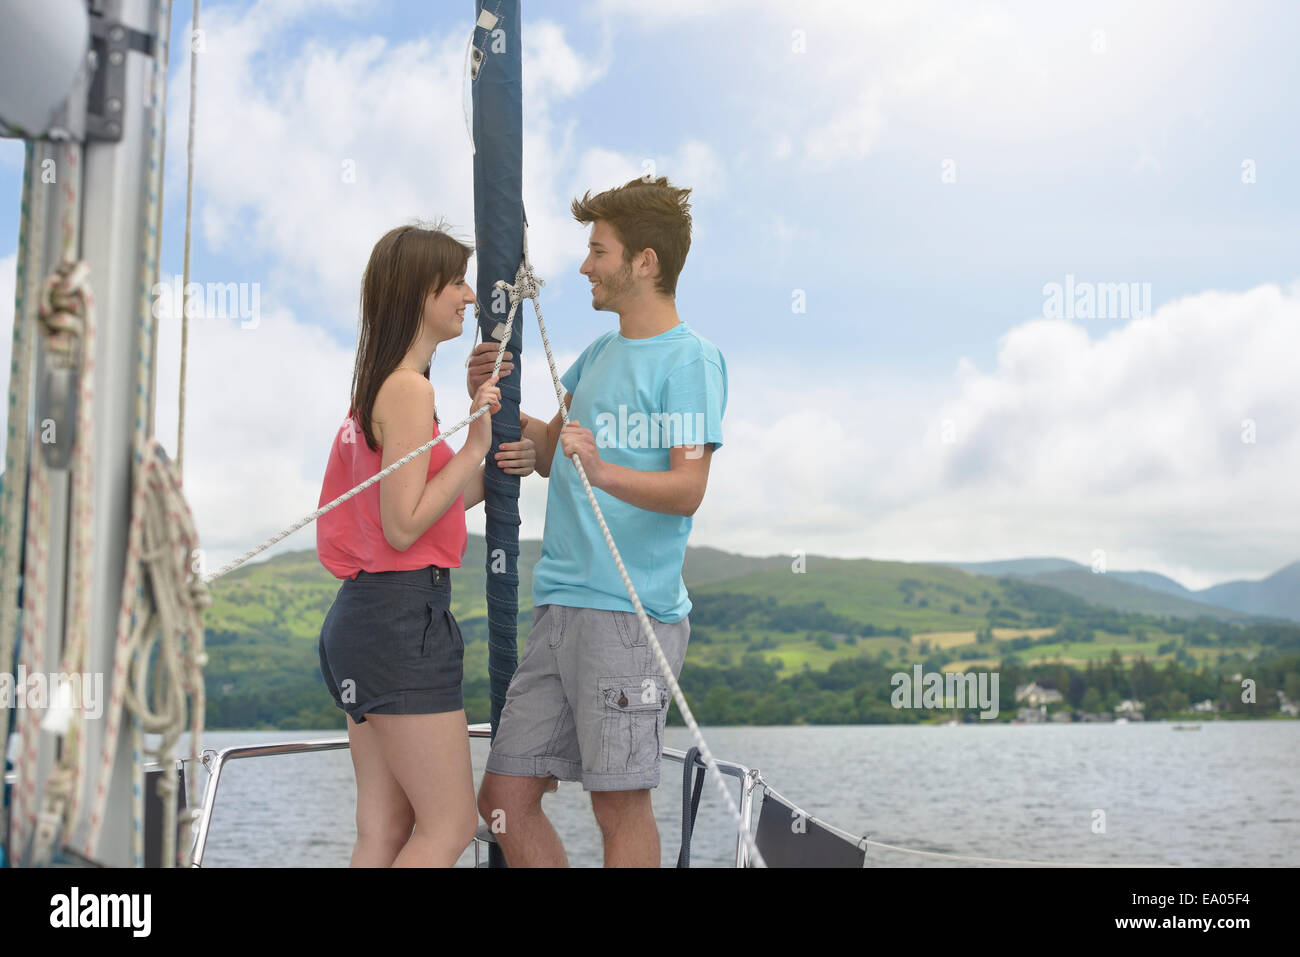 Young couple standing on bow of yacht sailing on lake under bright sunlight Stock Photo